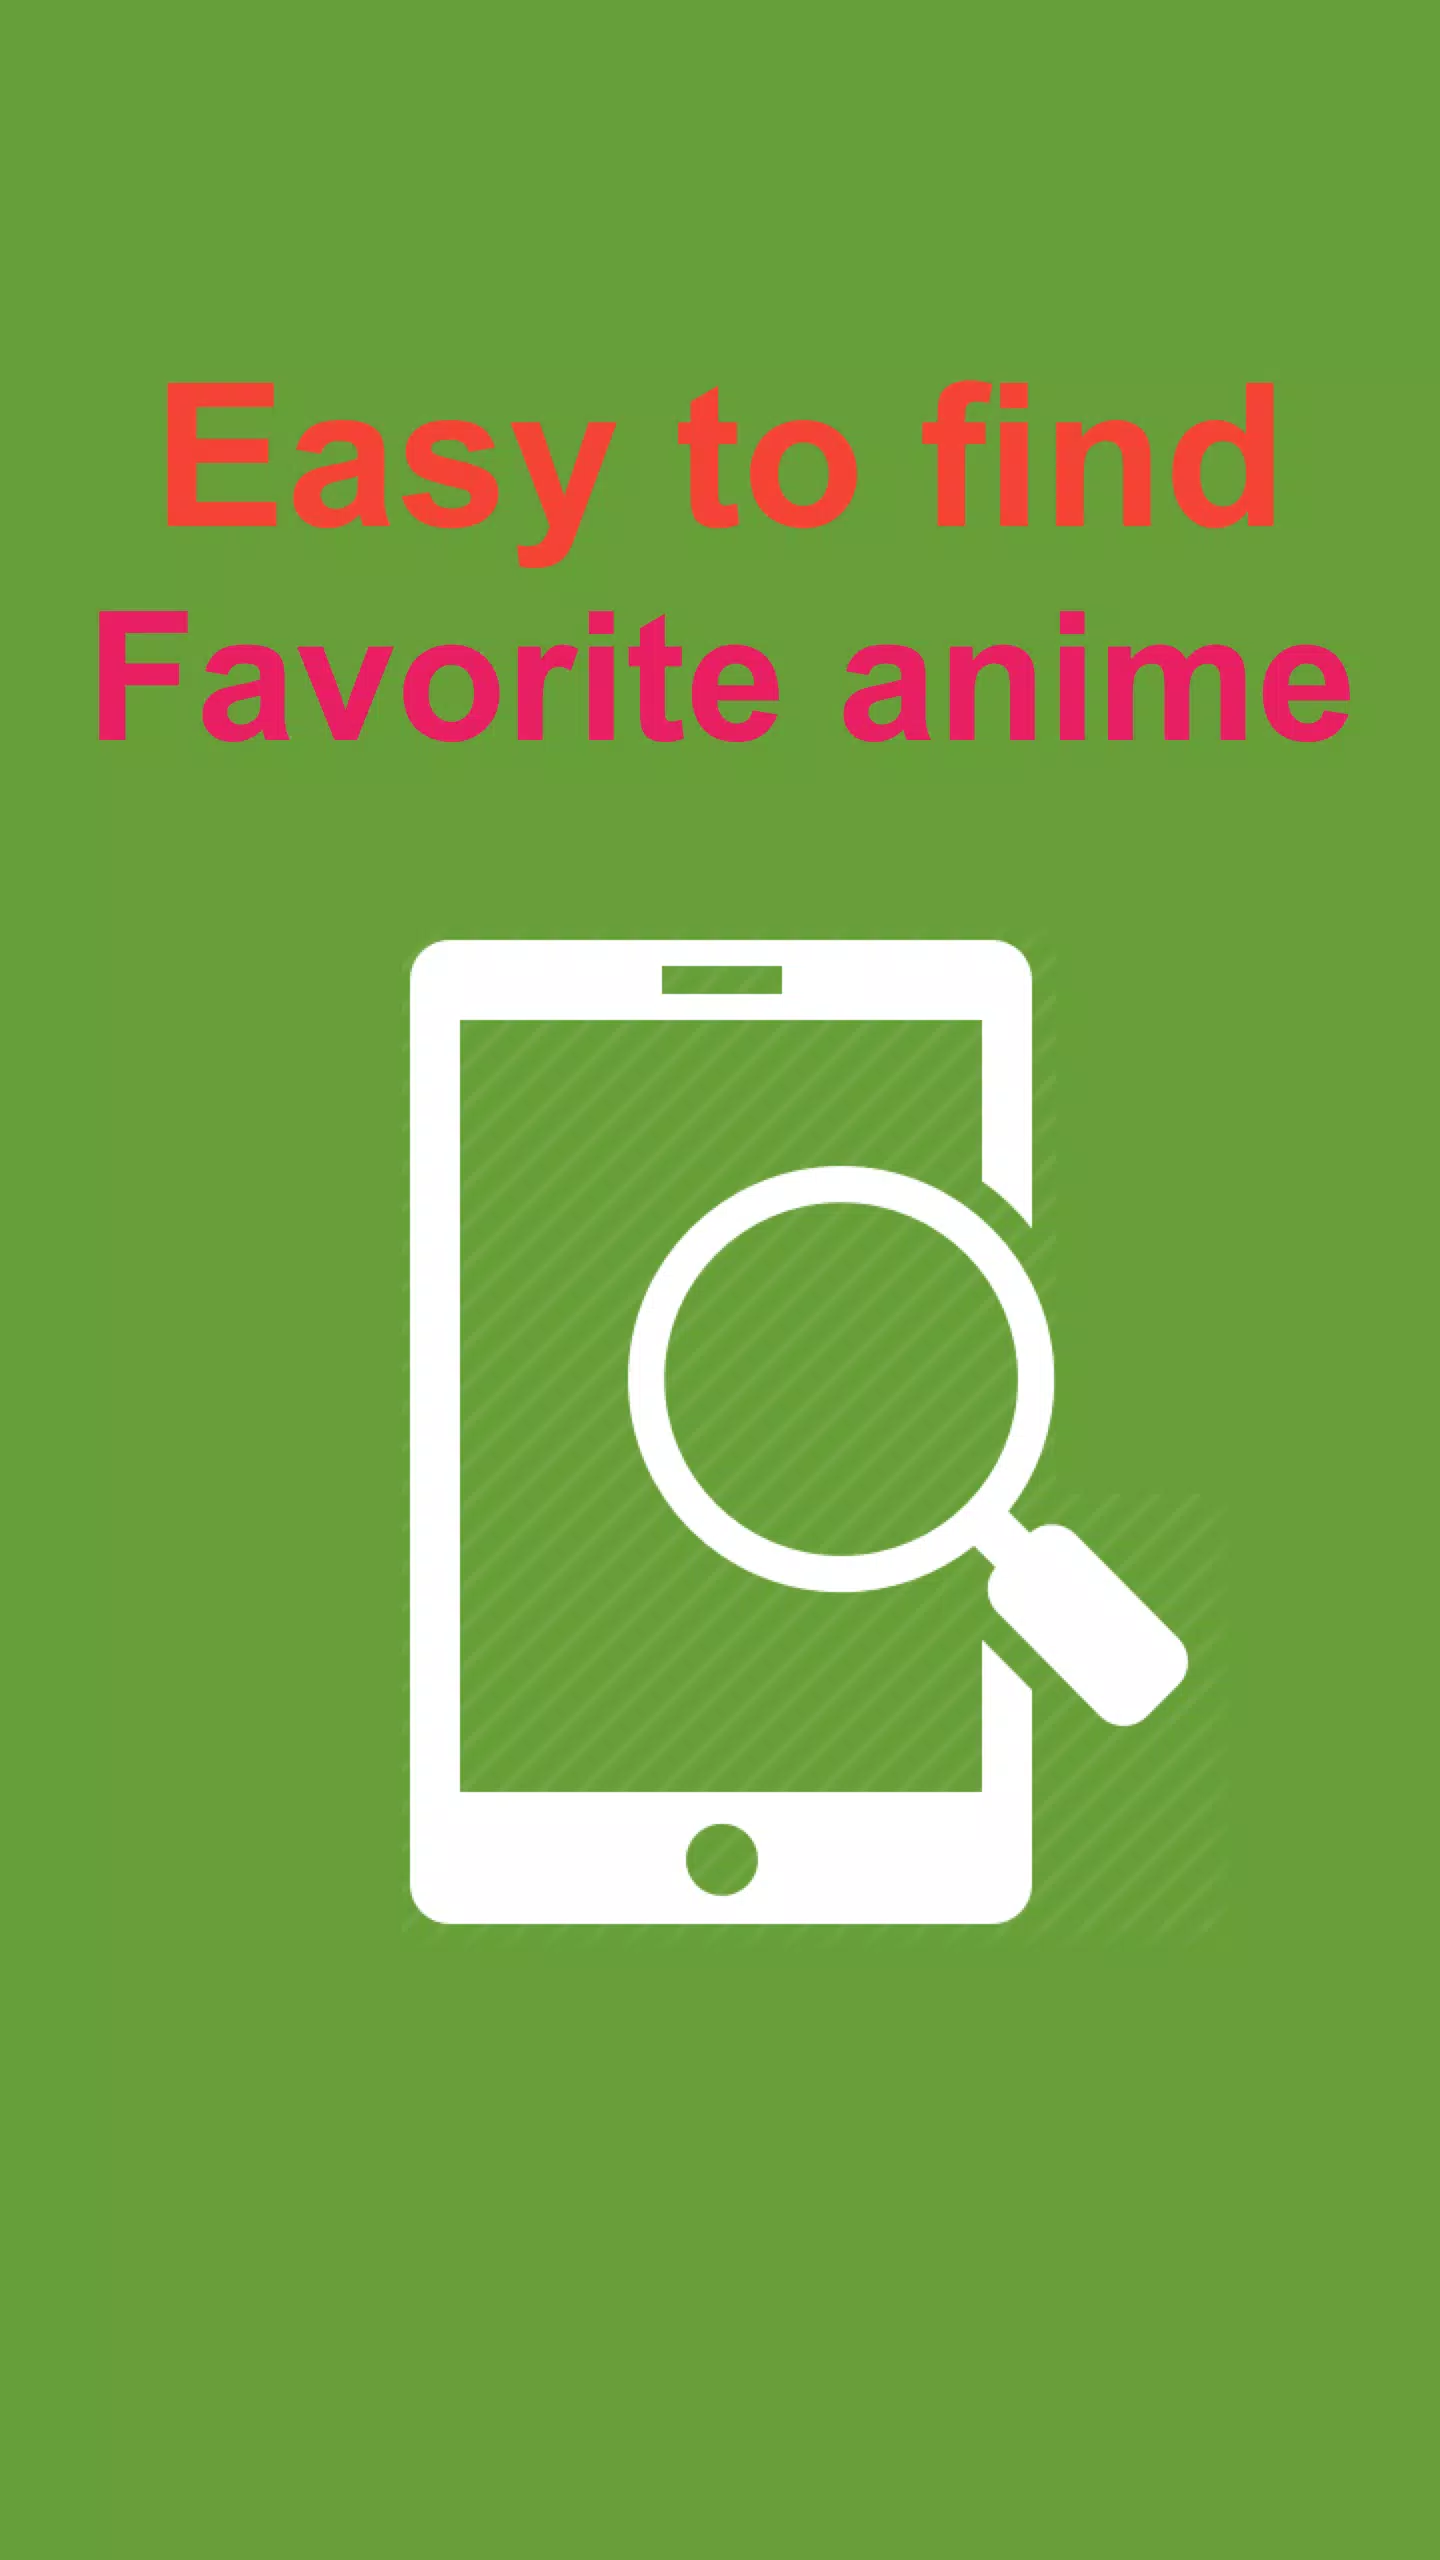 AniPlus - Watch Anime Online Apk Download for Android- Latest version -  watch.ani.hd